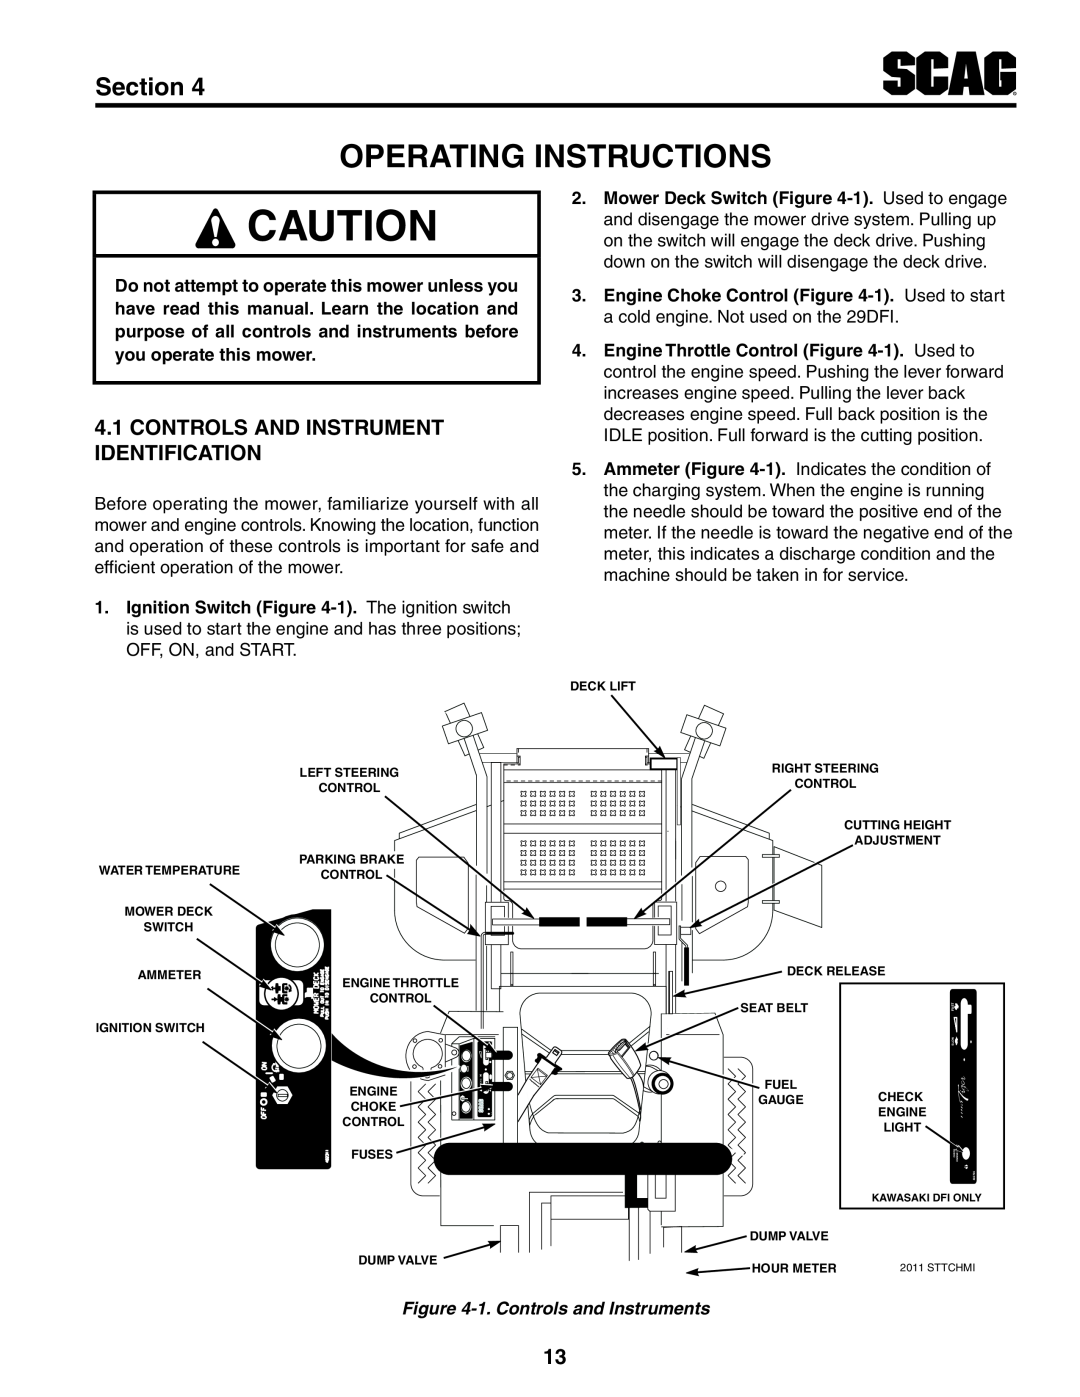 Scag Power Equipment STT-35BVAC, STT-29DFI manual Operating Instructions, Controls And Instrument Identification, Section 